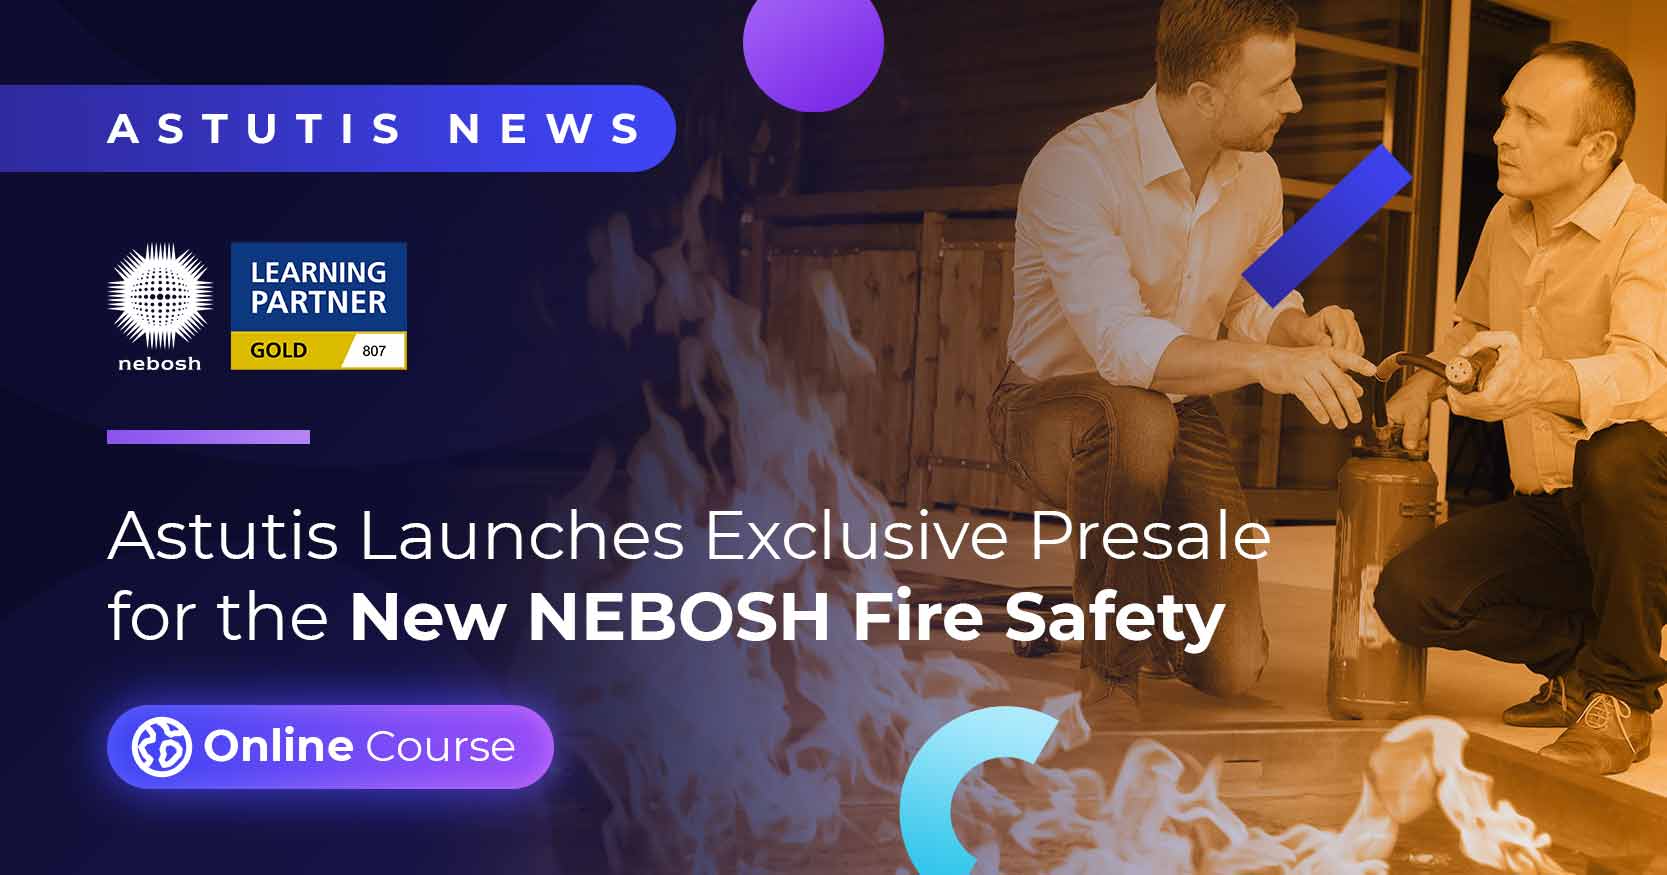 Astutis Launches Exclusive Presale for the New NEBOSH Fire Safety Online Course Image